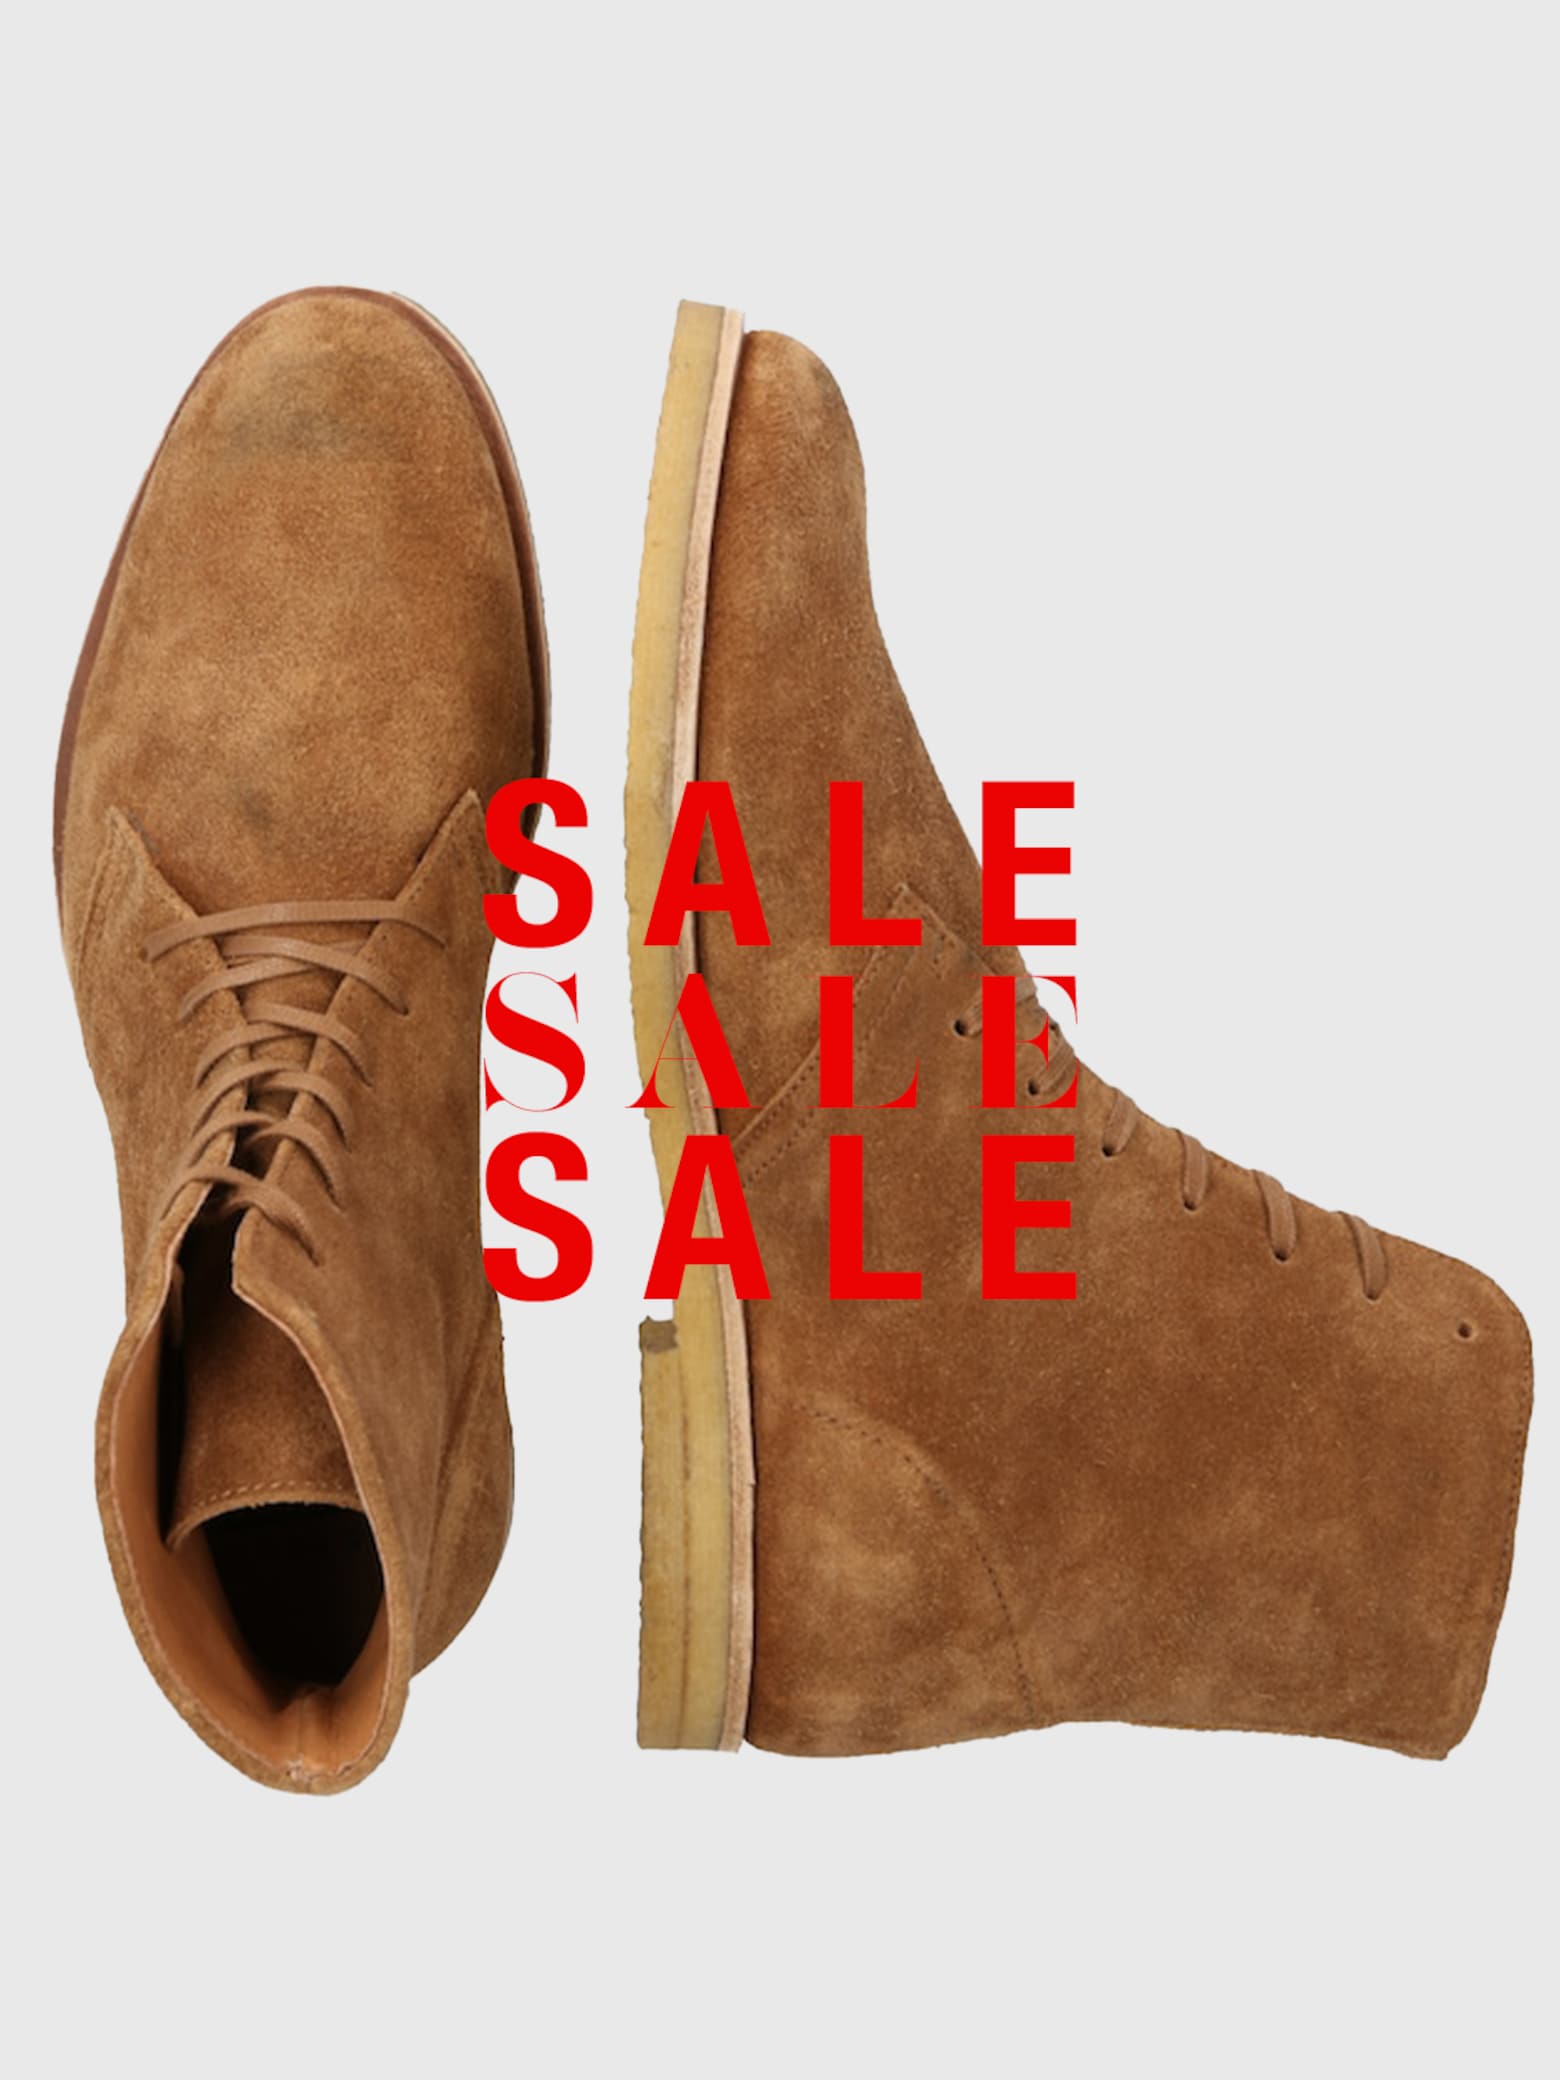 Save now! Boots